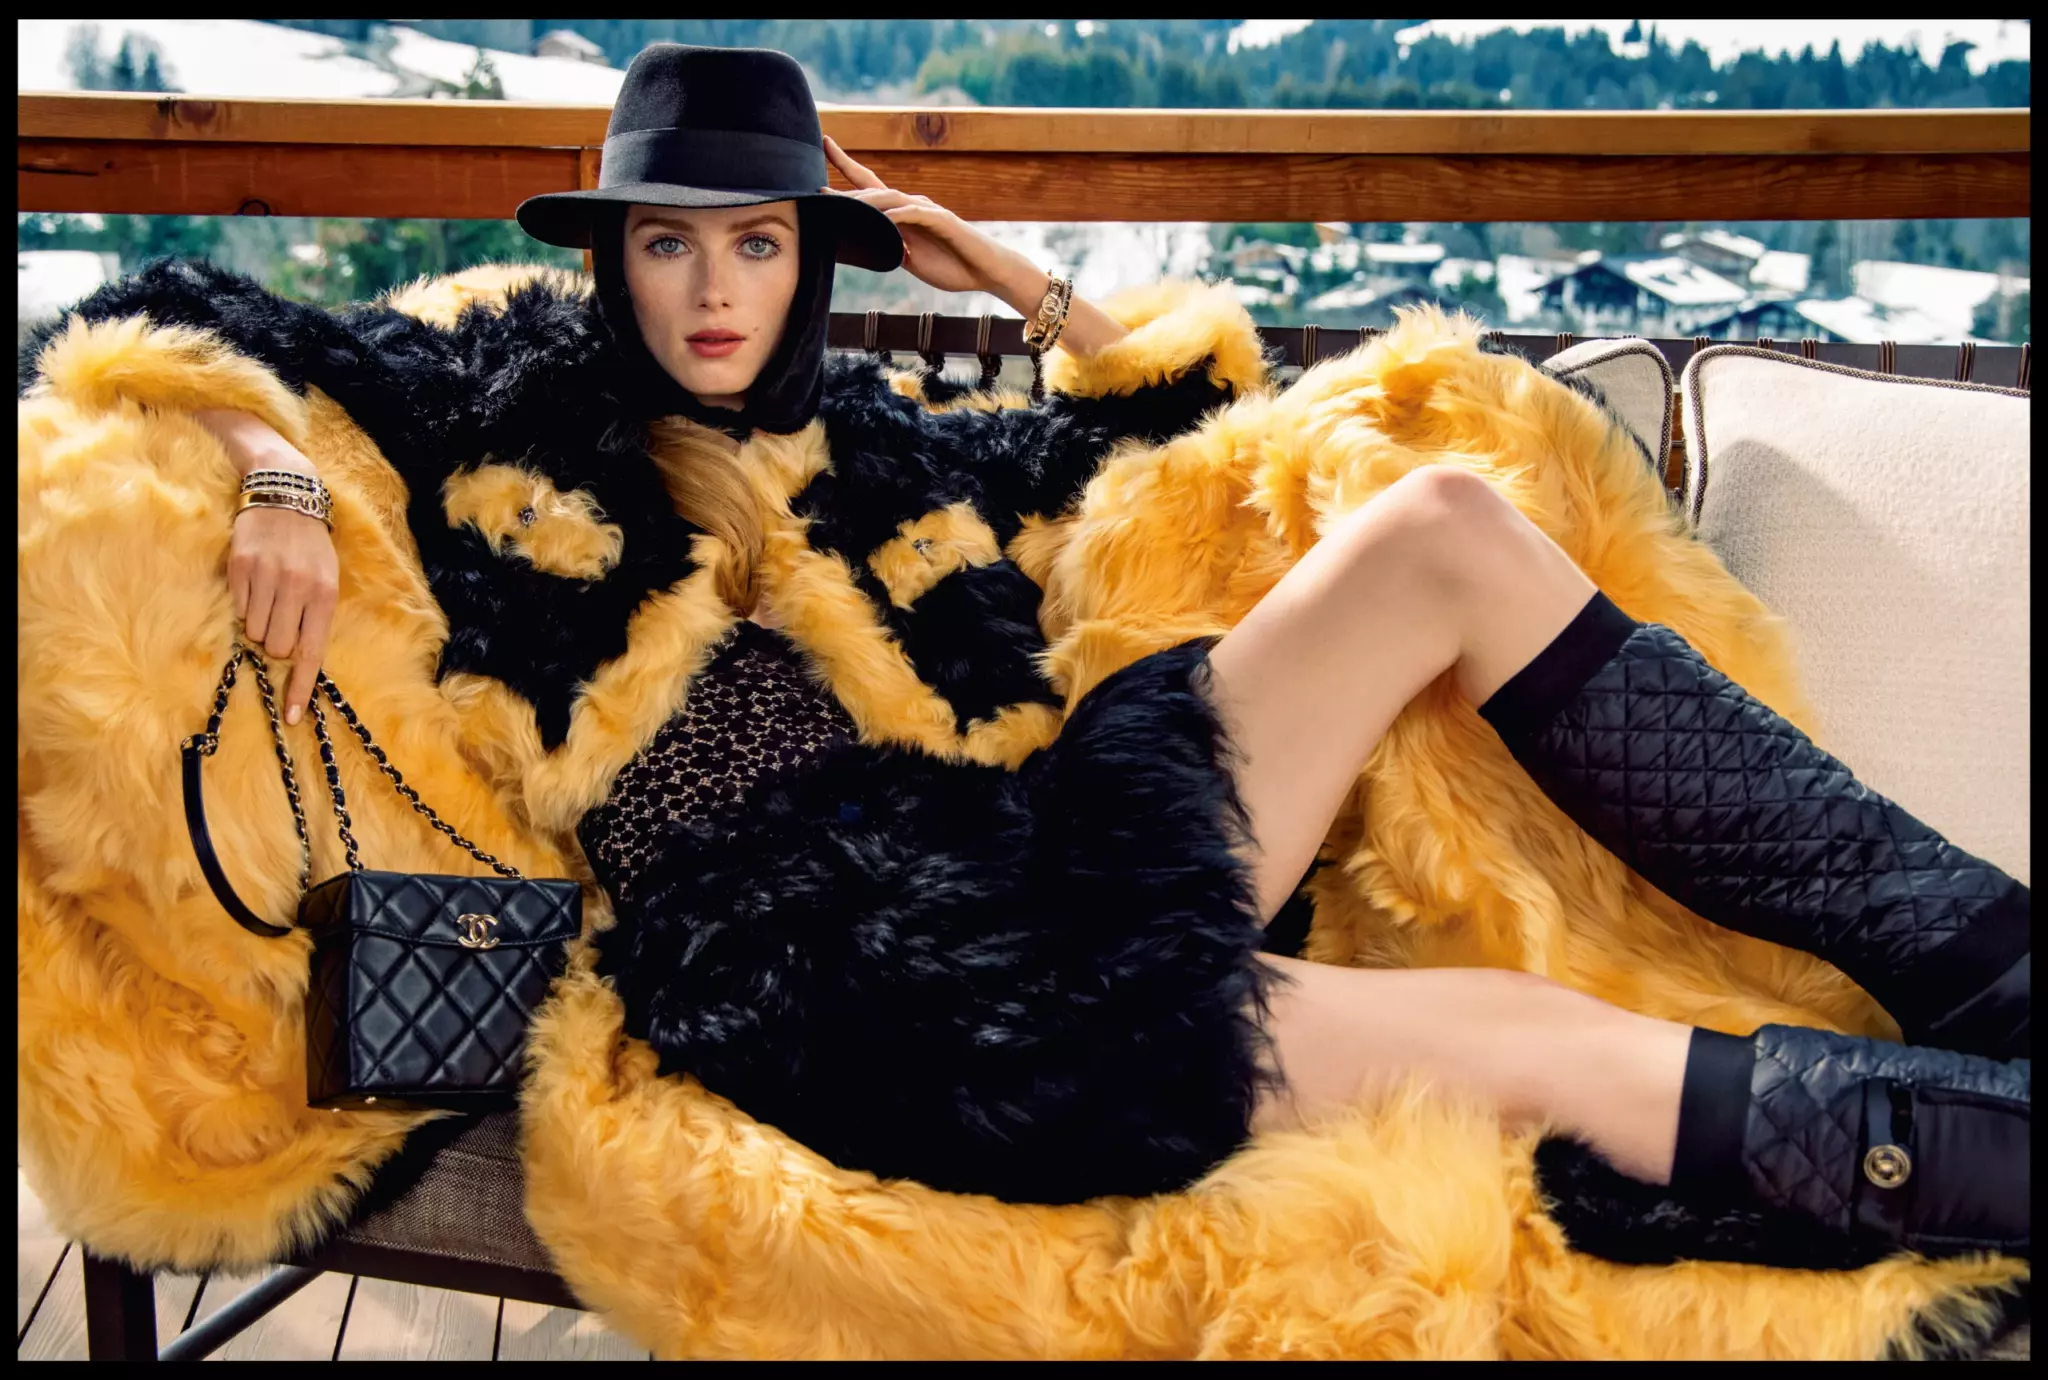 Fall-Winter 21/22 trends that fashionistas will adopt this season. Focus on iconic Chanel, Baum und Pferdgarten, By Malina and By Malene Birger. 9